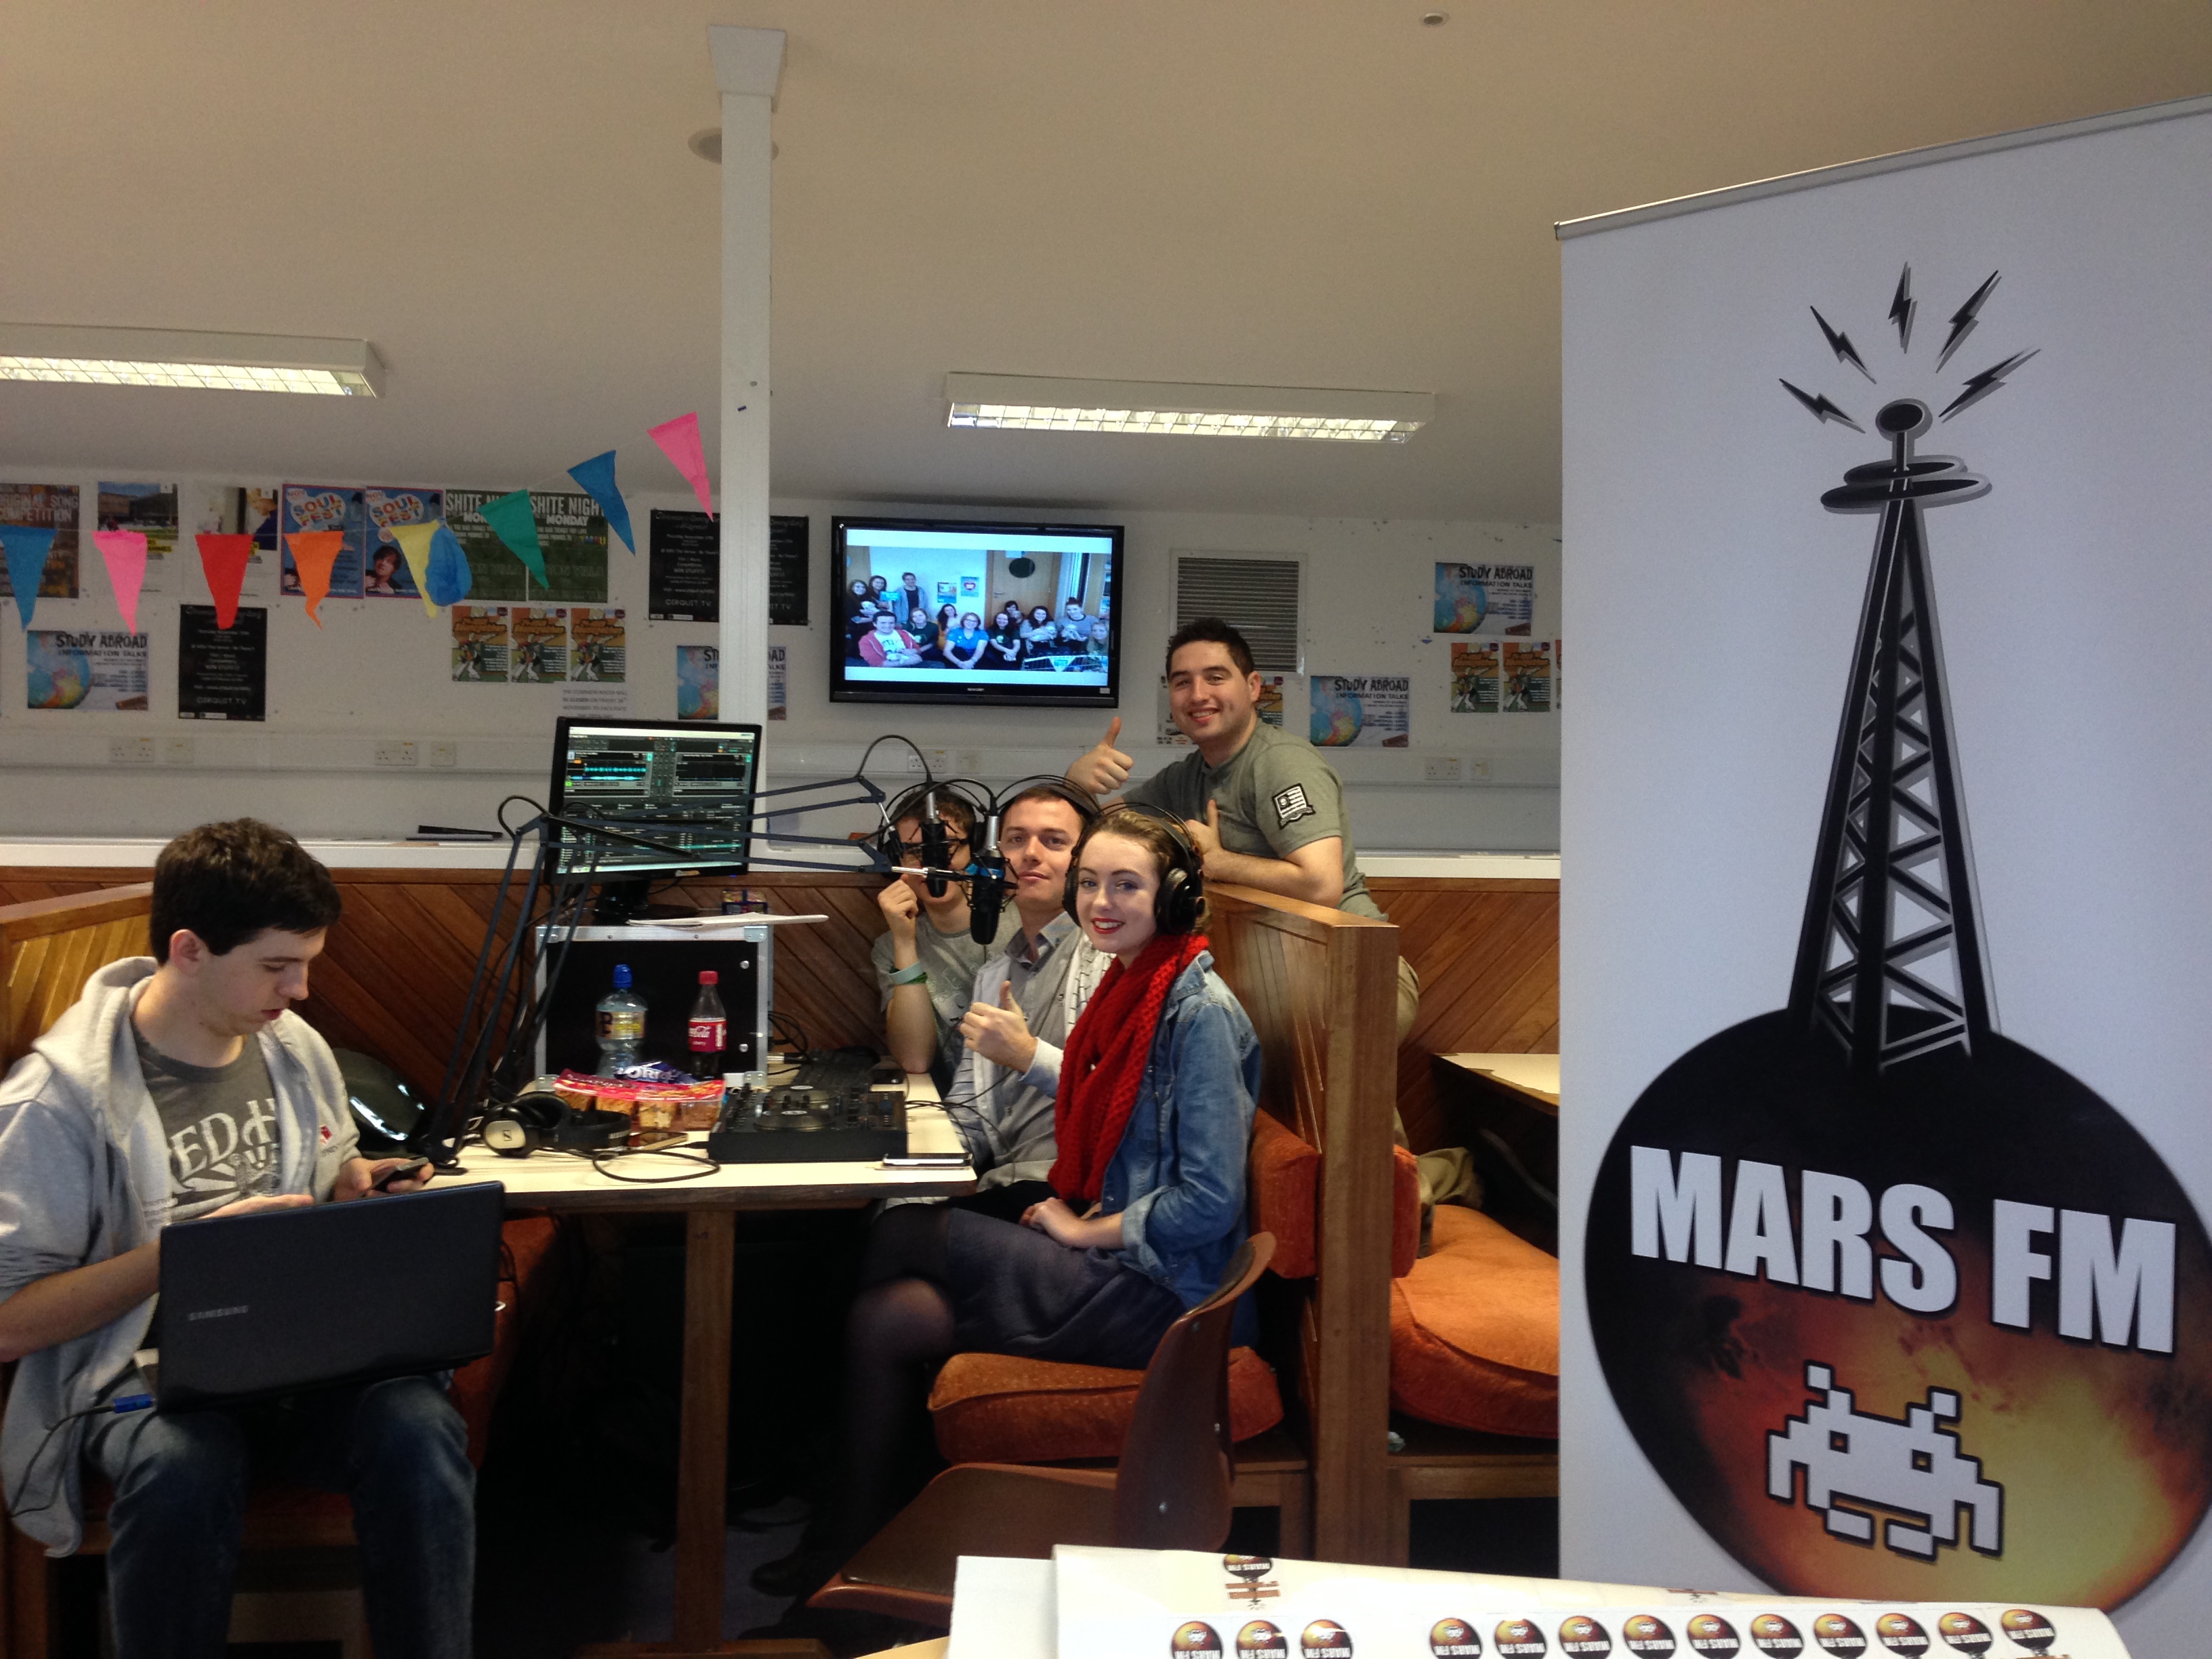 Mars FM broadcasting during Open Day